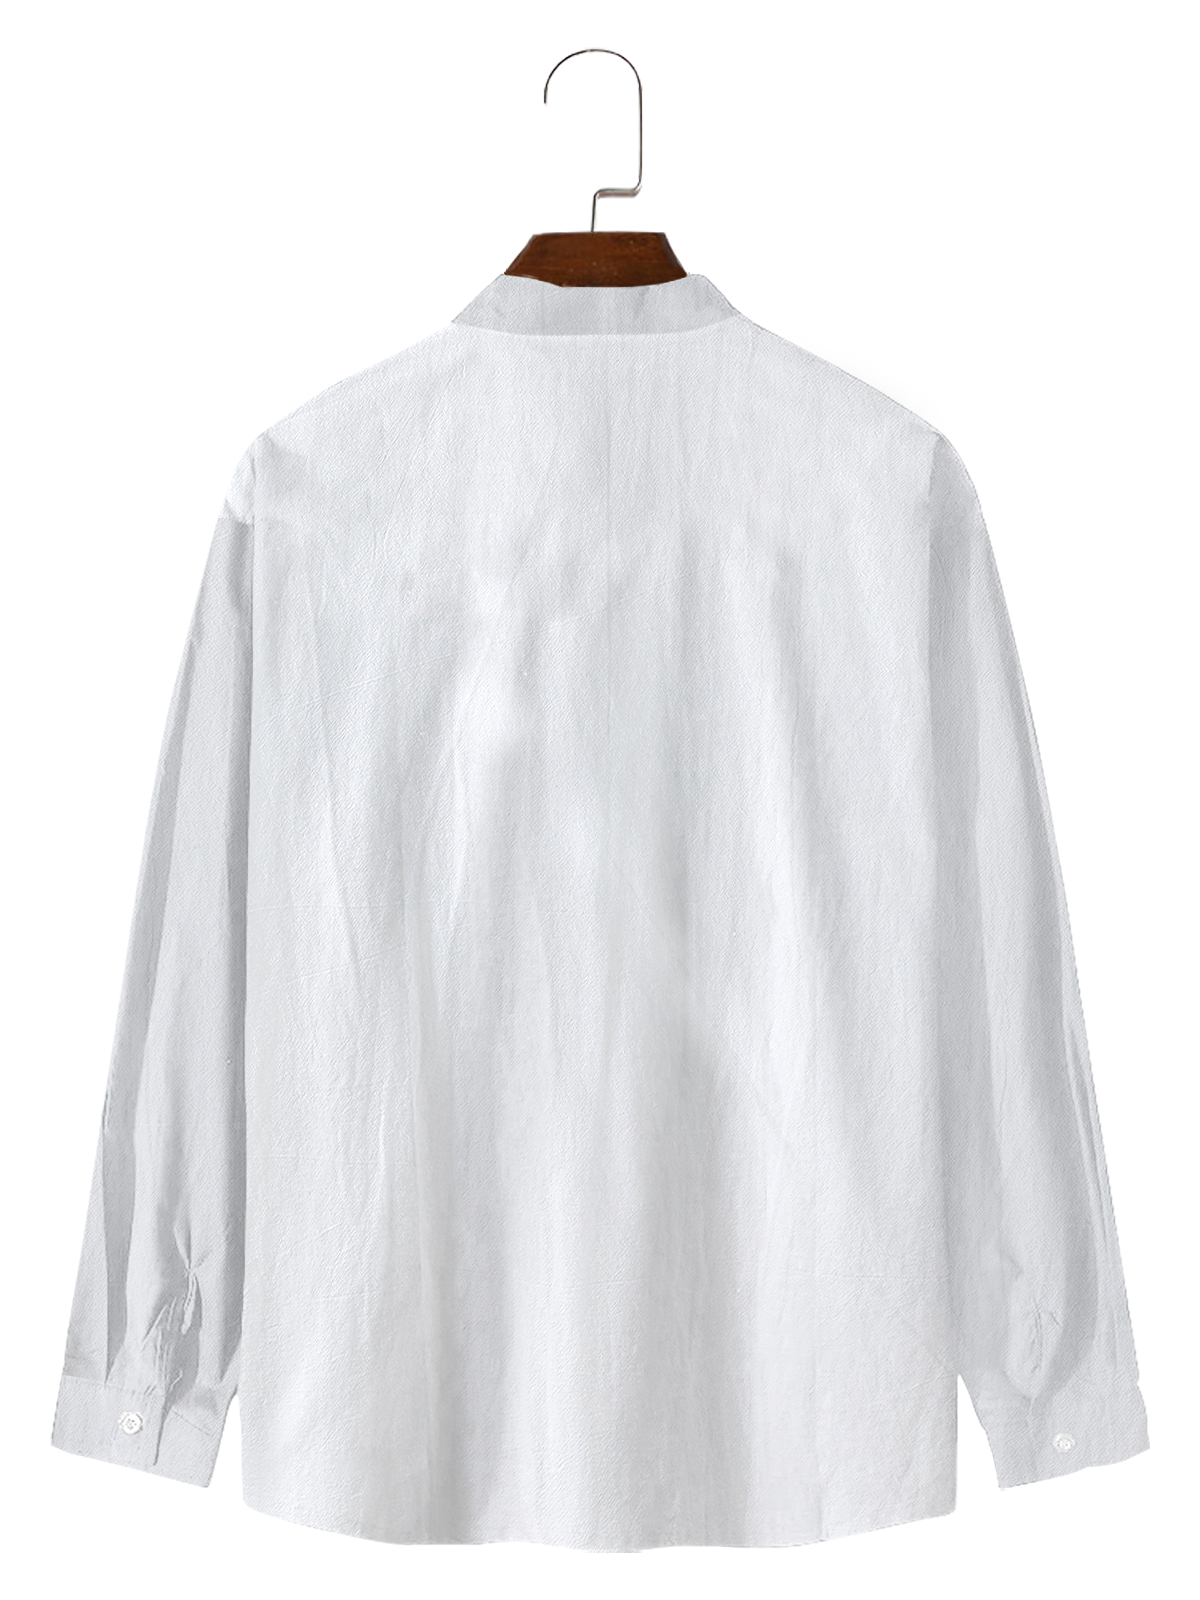 Net based coconut leisure long-sleeved shirt color cotton and linen style